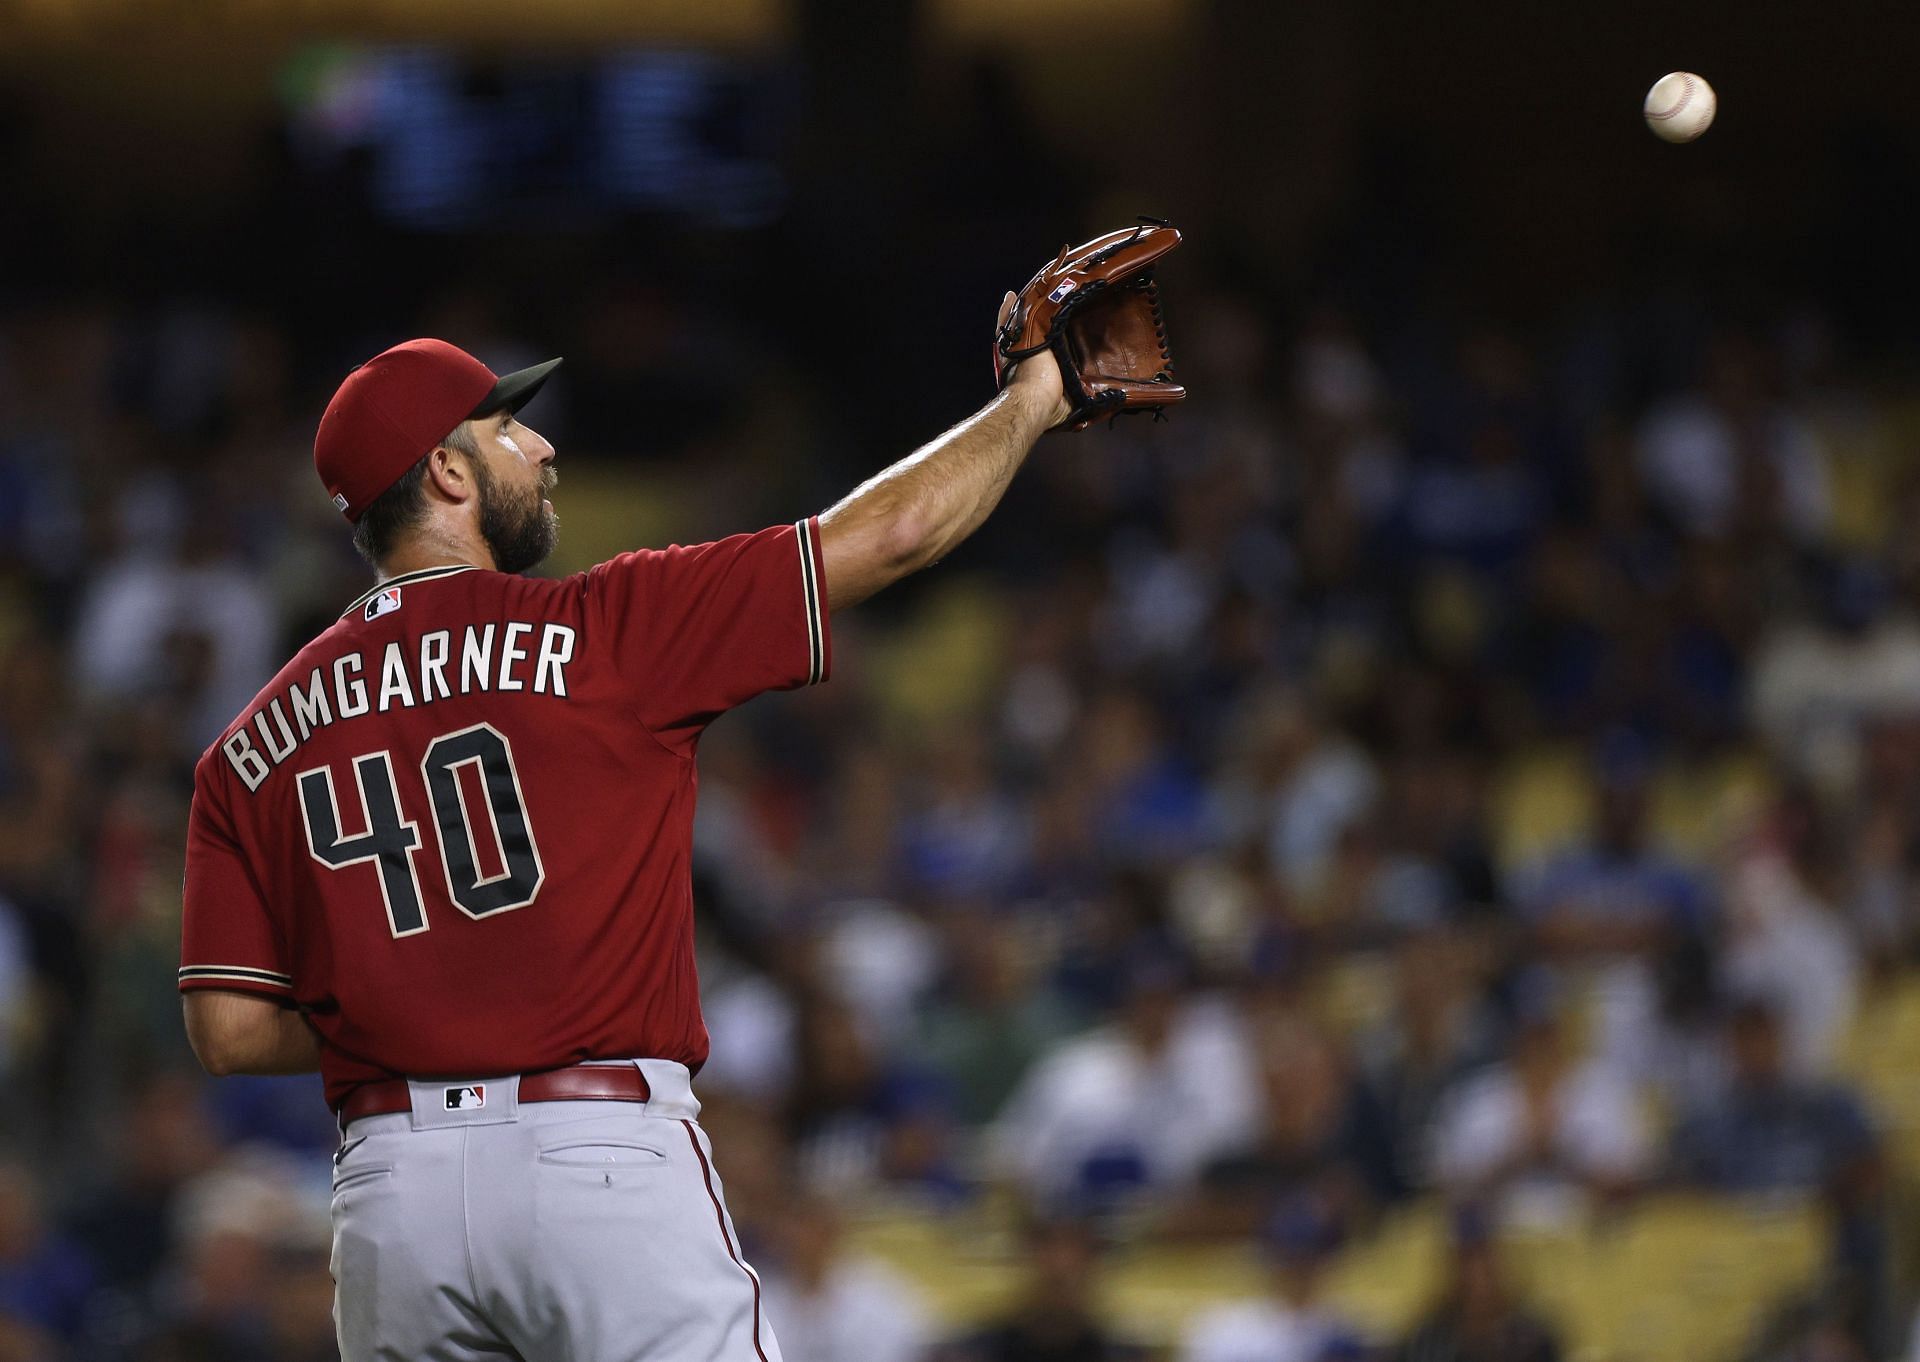 What does DFA mean in baseball? What's next for Madison Bumgarner